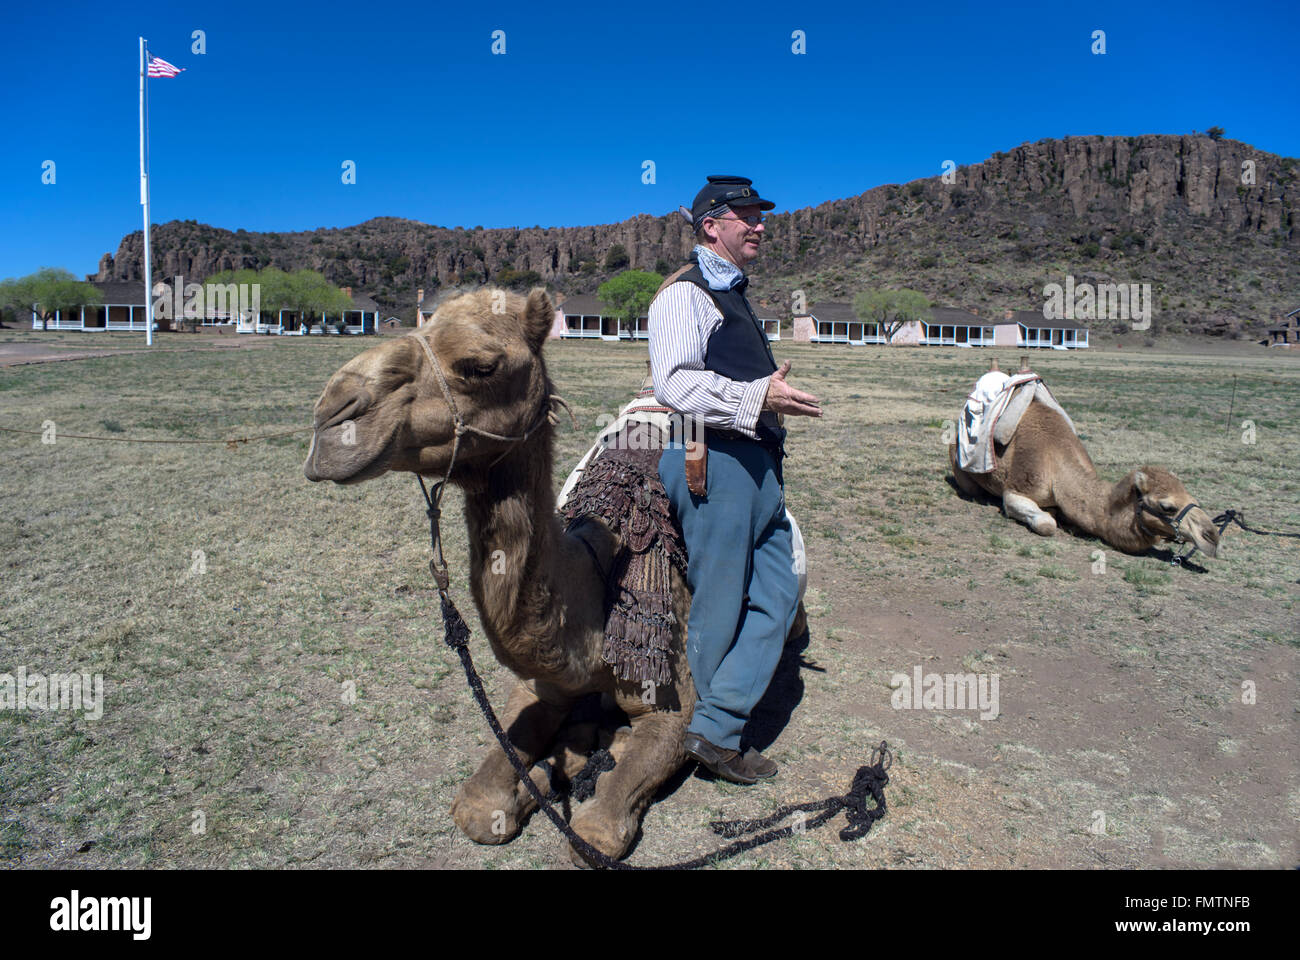 Camels on display at historical Fort Davis, Texas, during an event celebrating the U.S. Army Camel Corps. Stock Photo